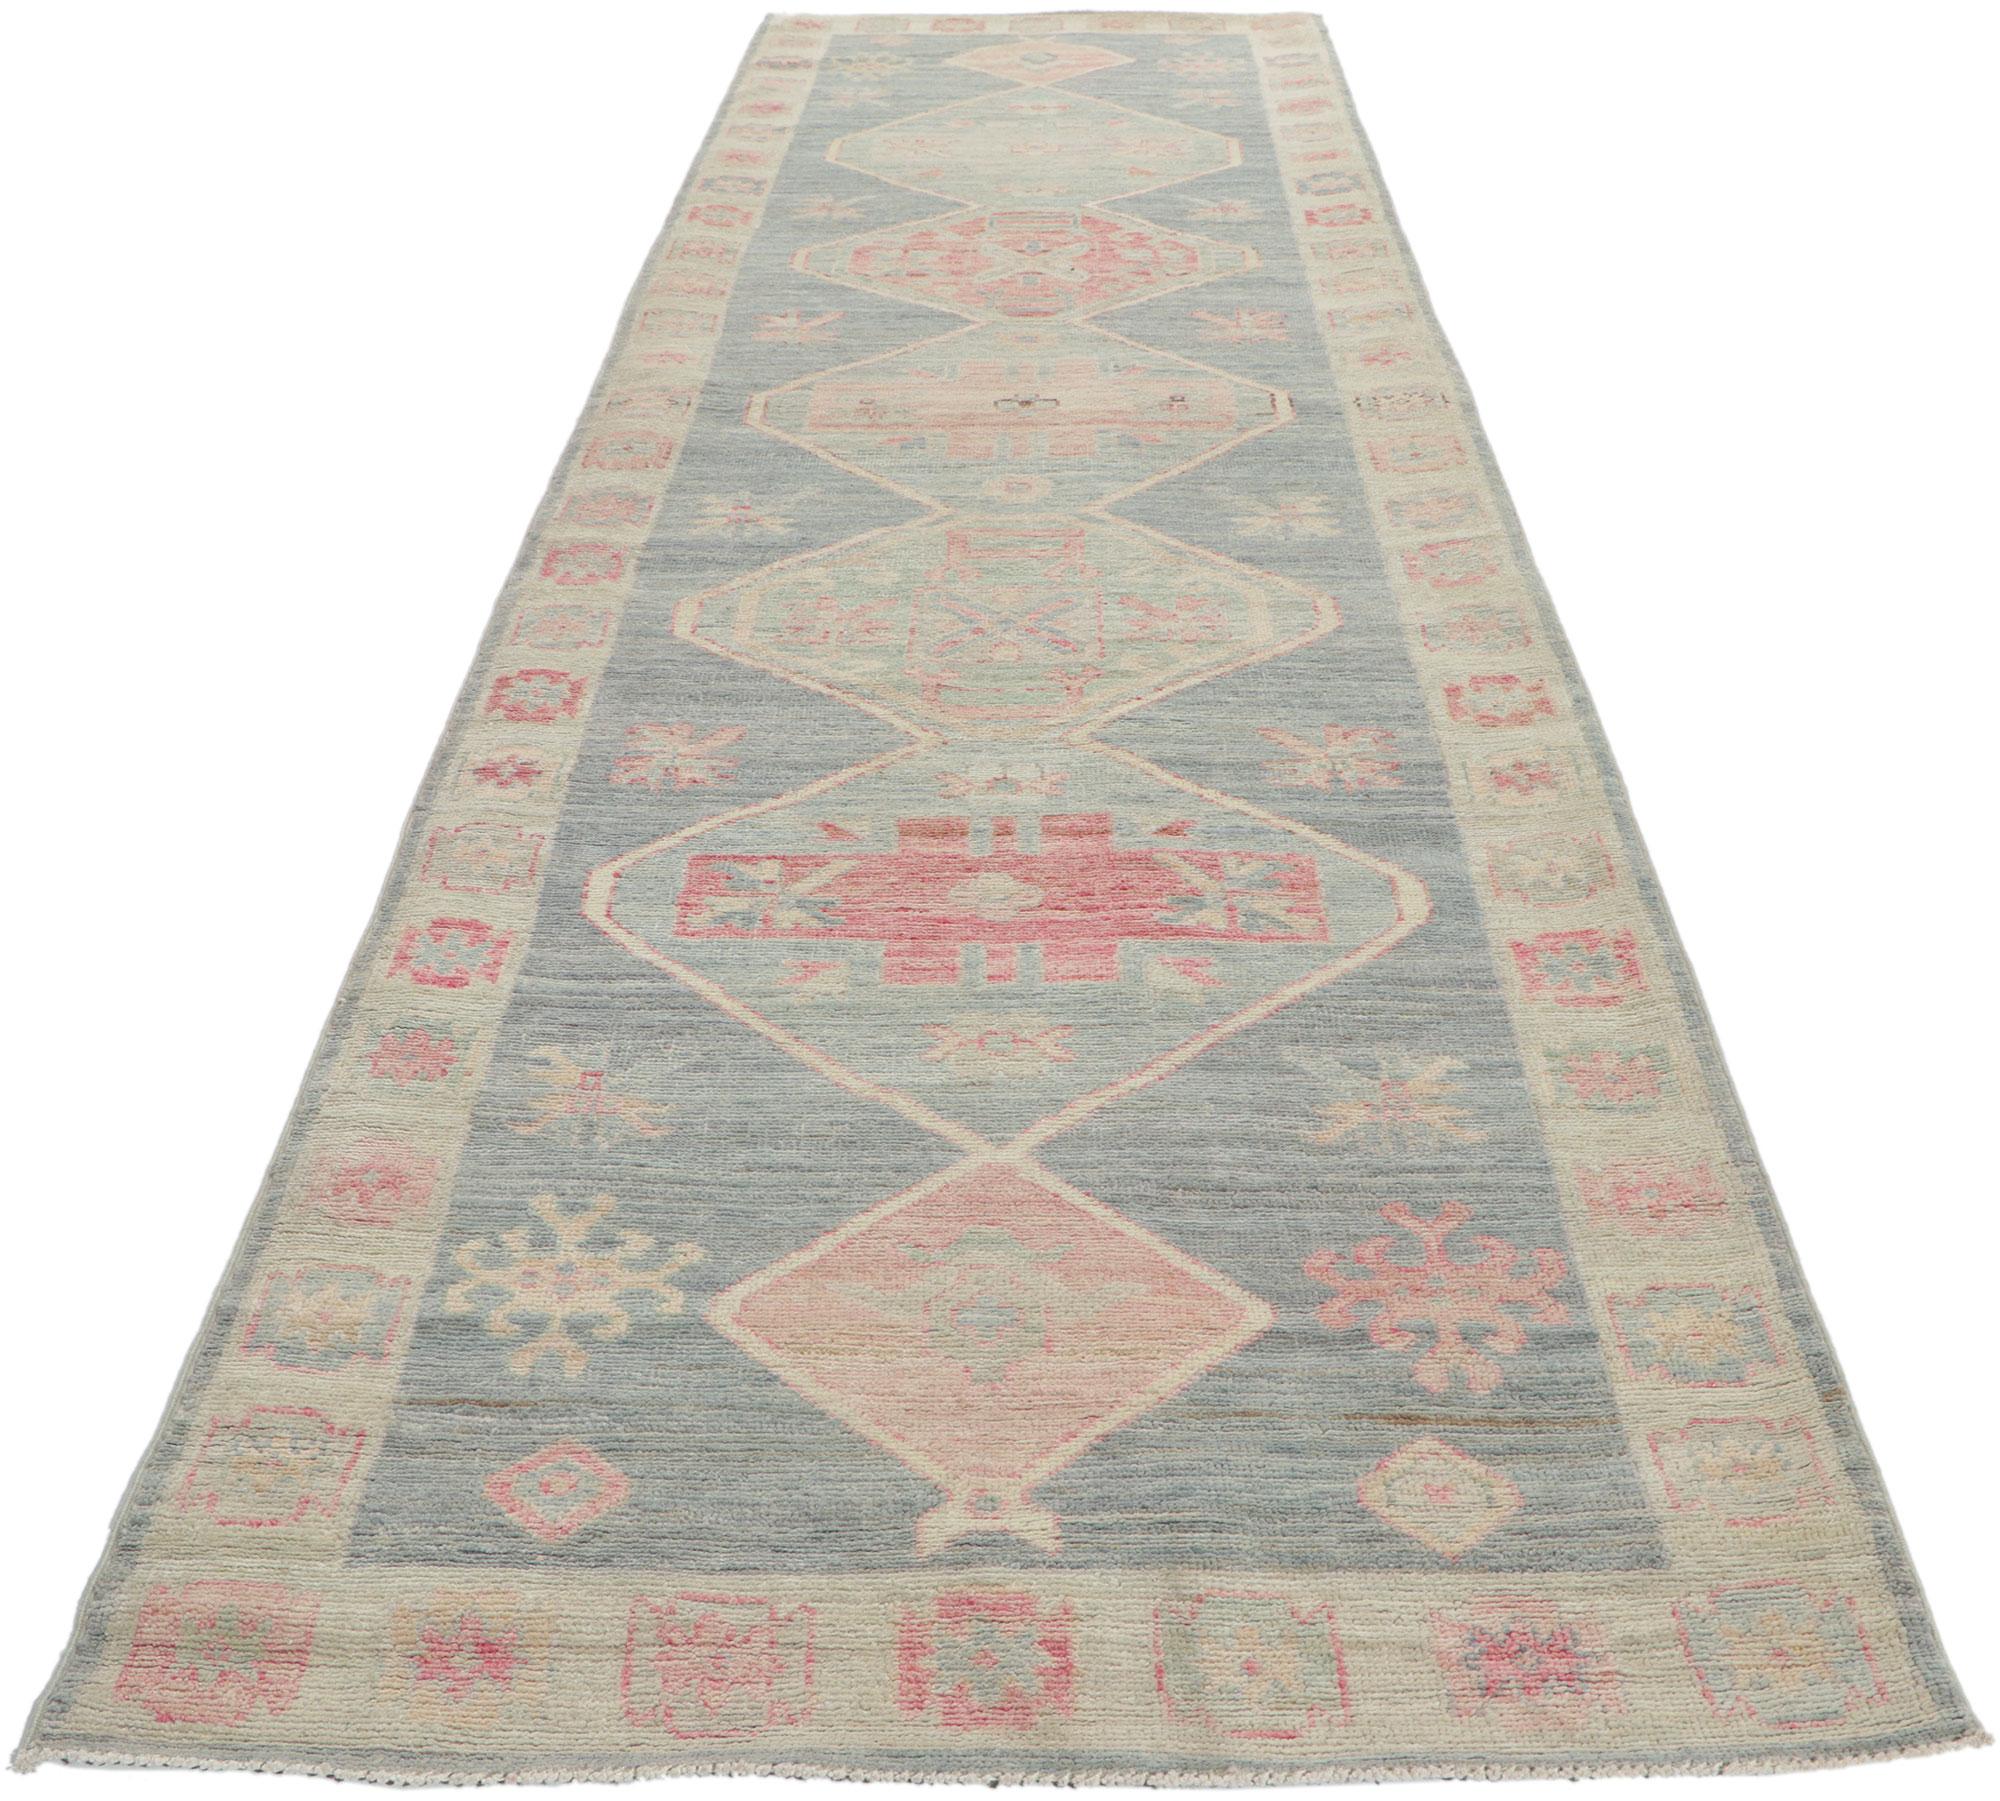 Pakistani New Vintage-Inspired Oushak Runner with Modern Style For Sale